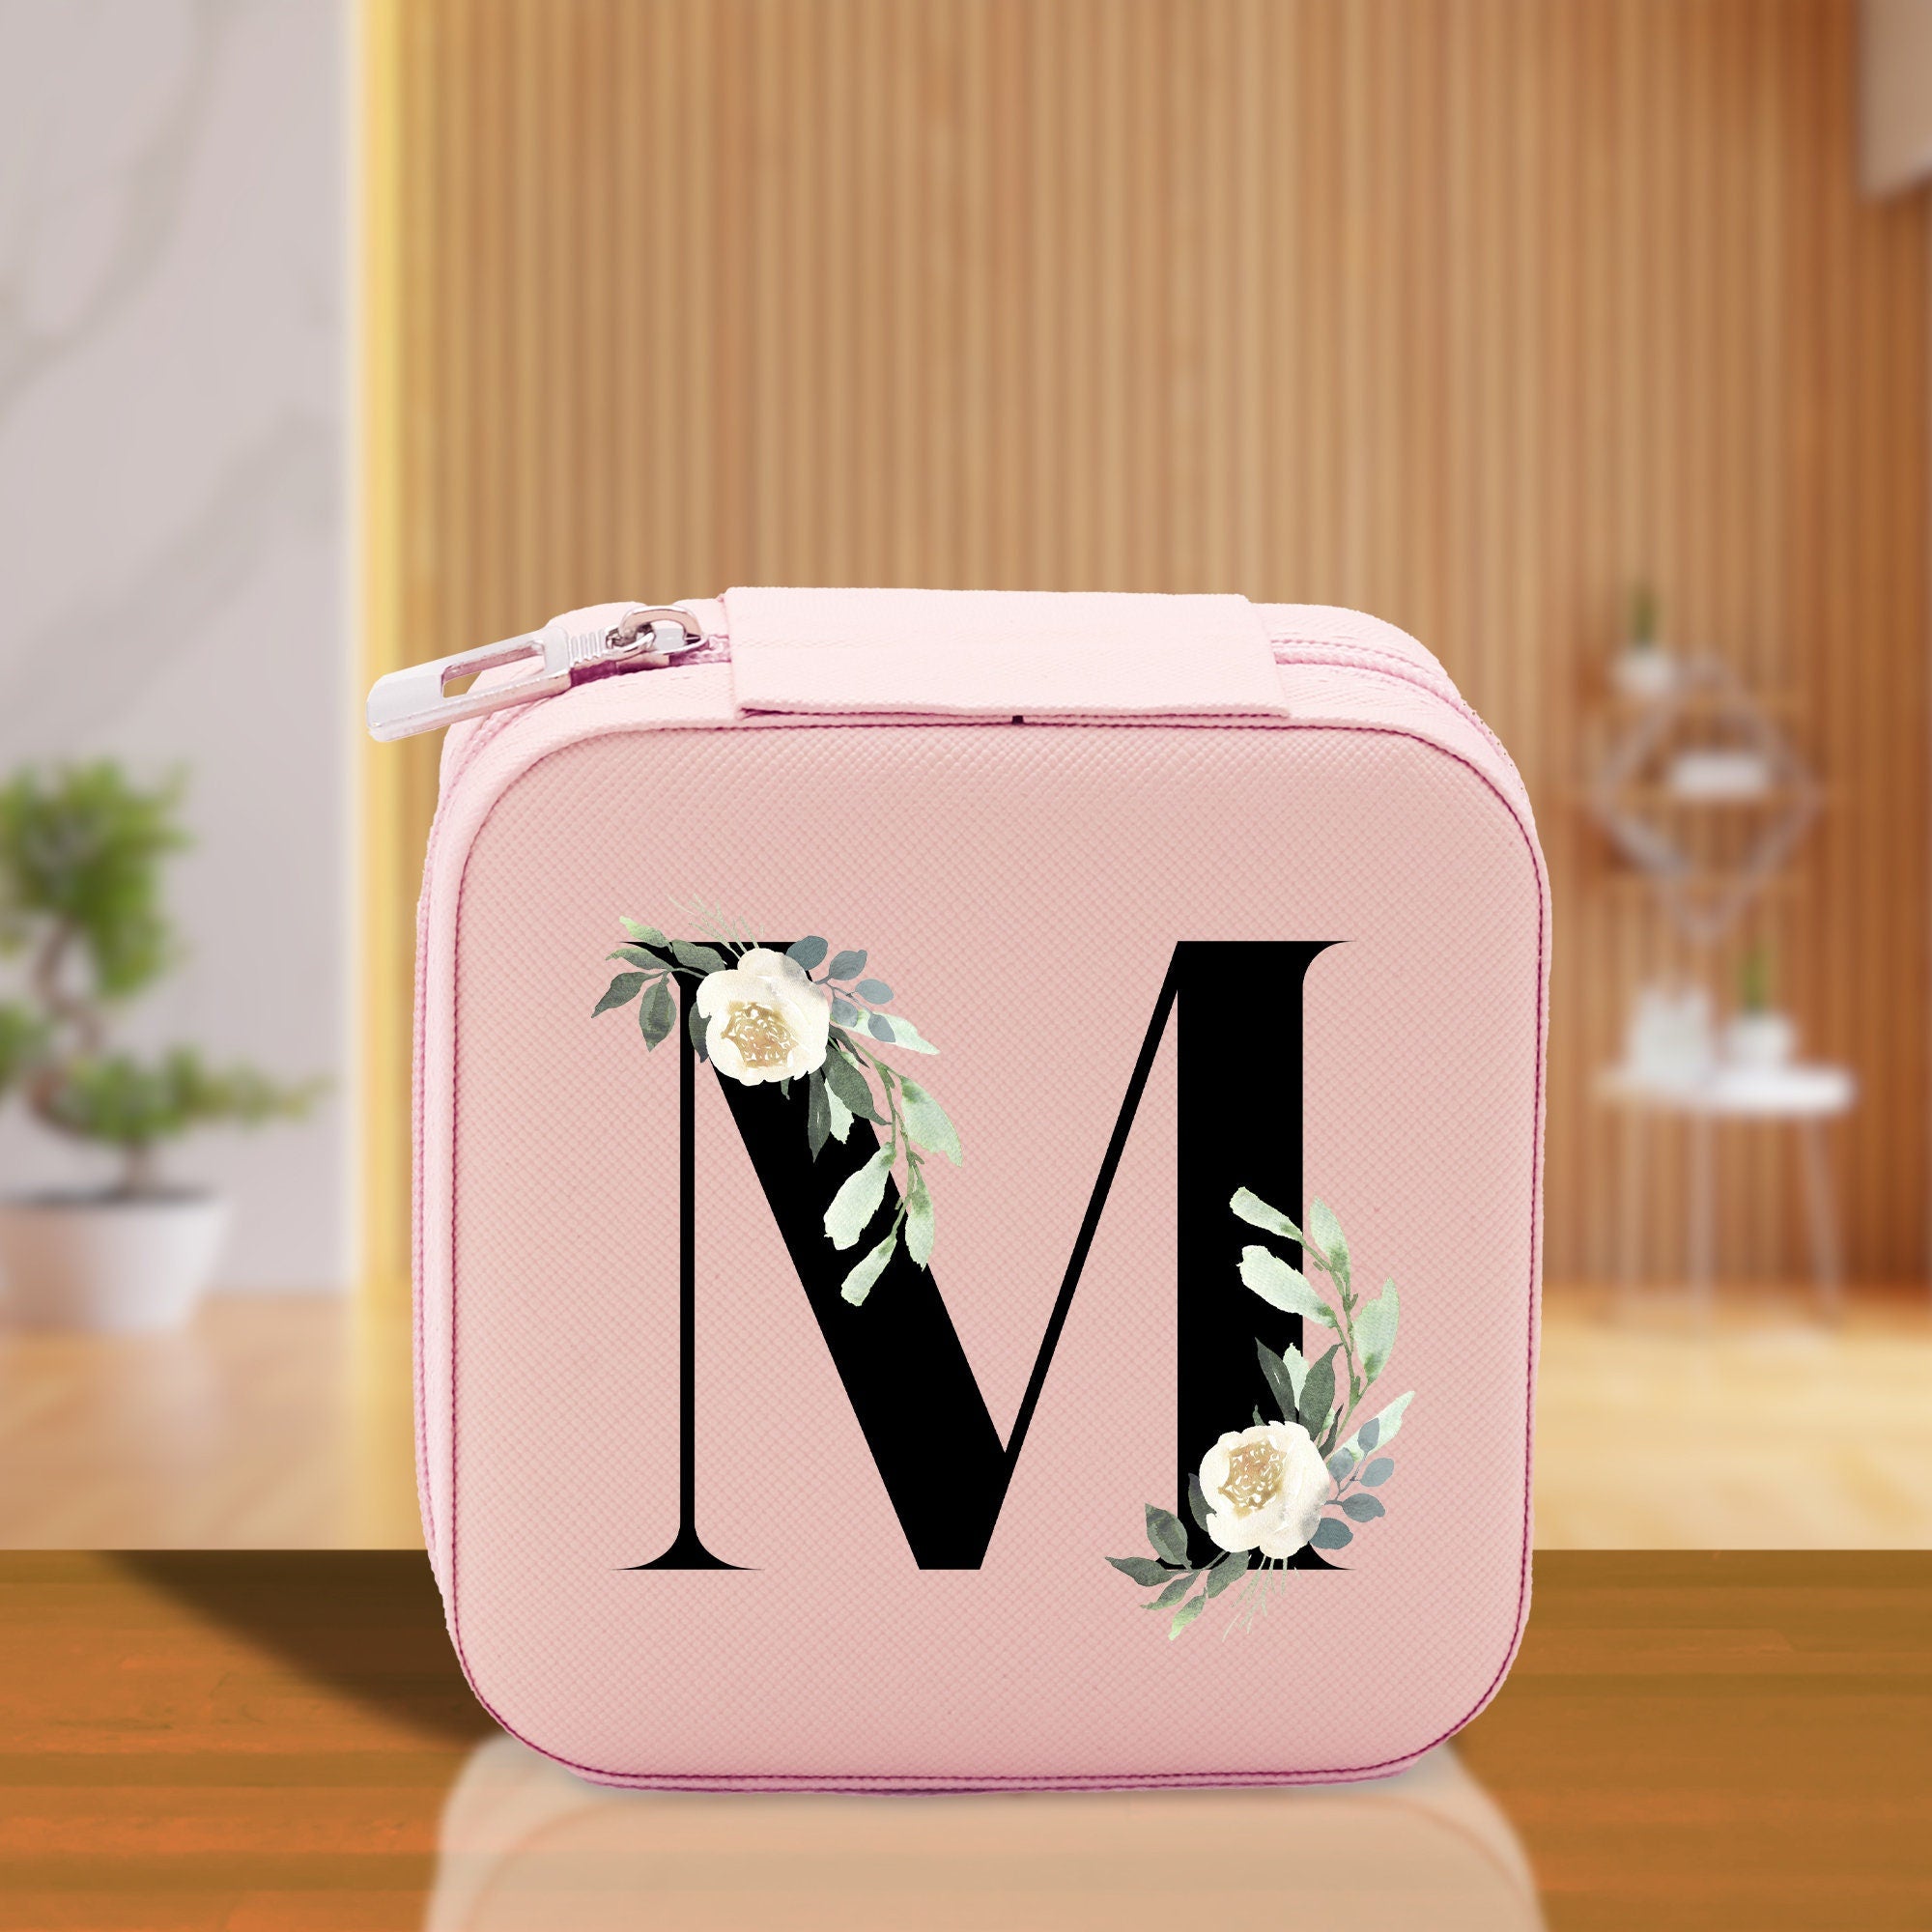 a pink lunch box with a monogrammed letter m on it